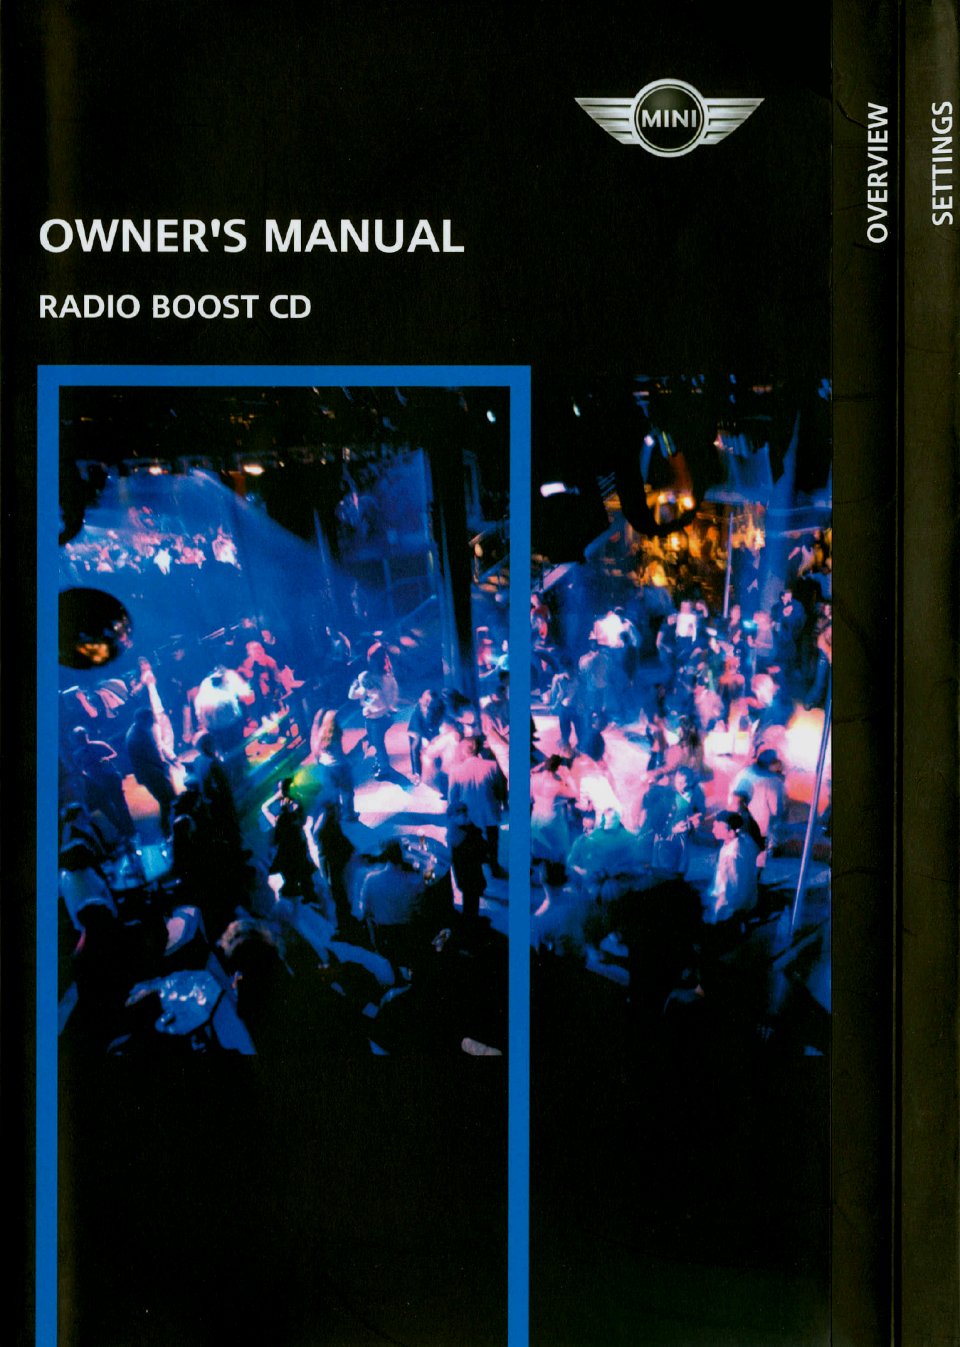 Owners Manual - Radio Boost CD - Cover